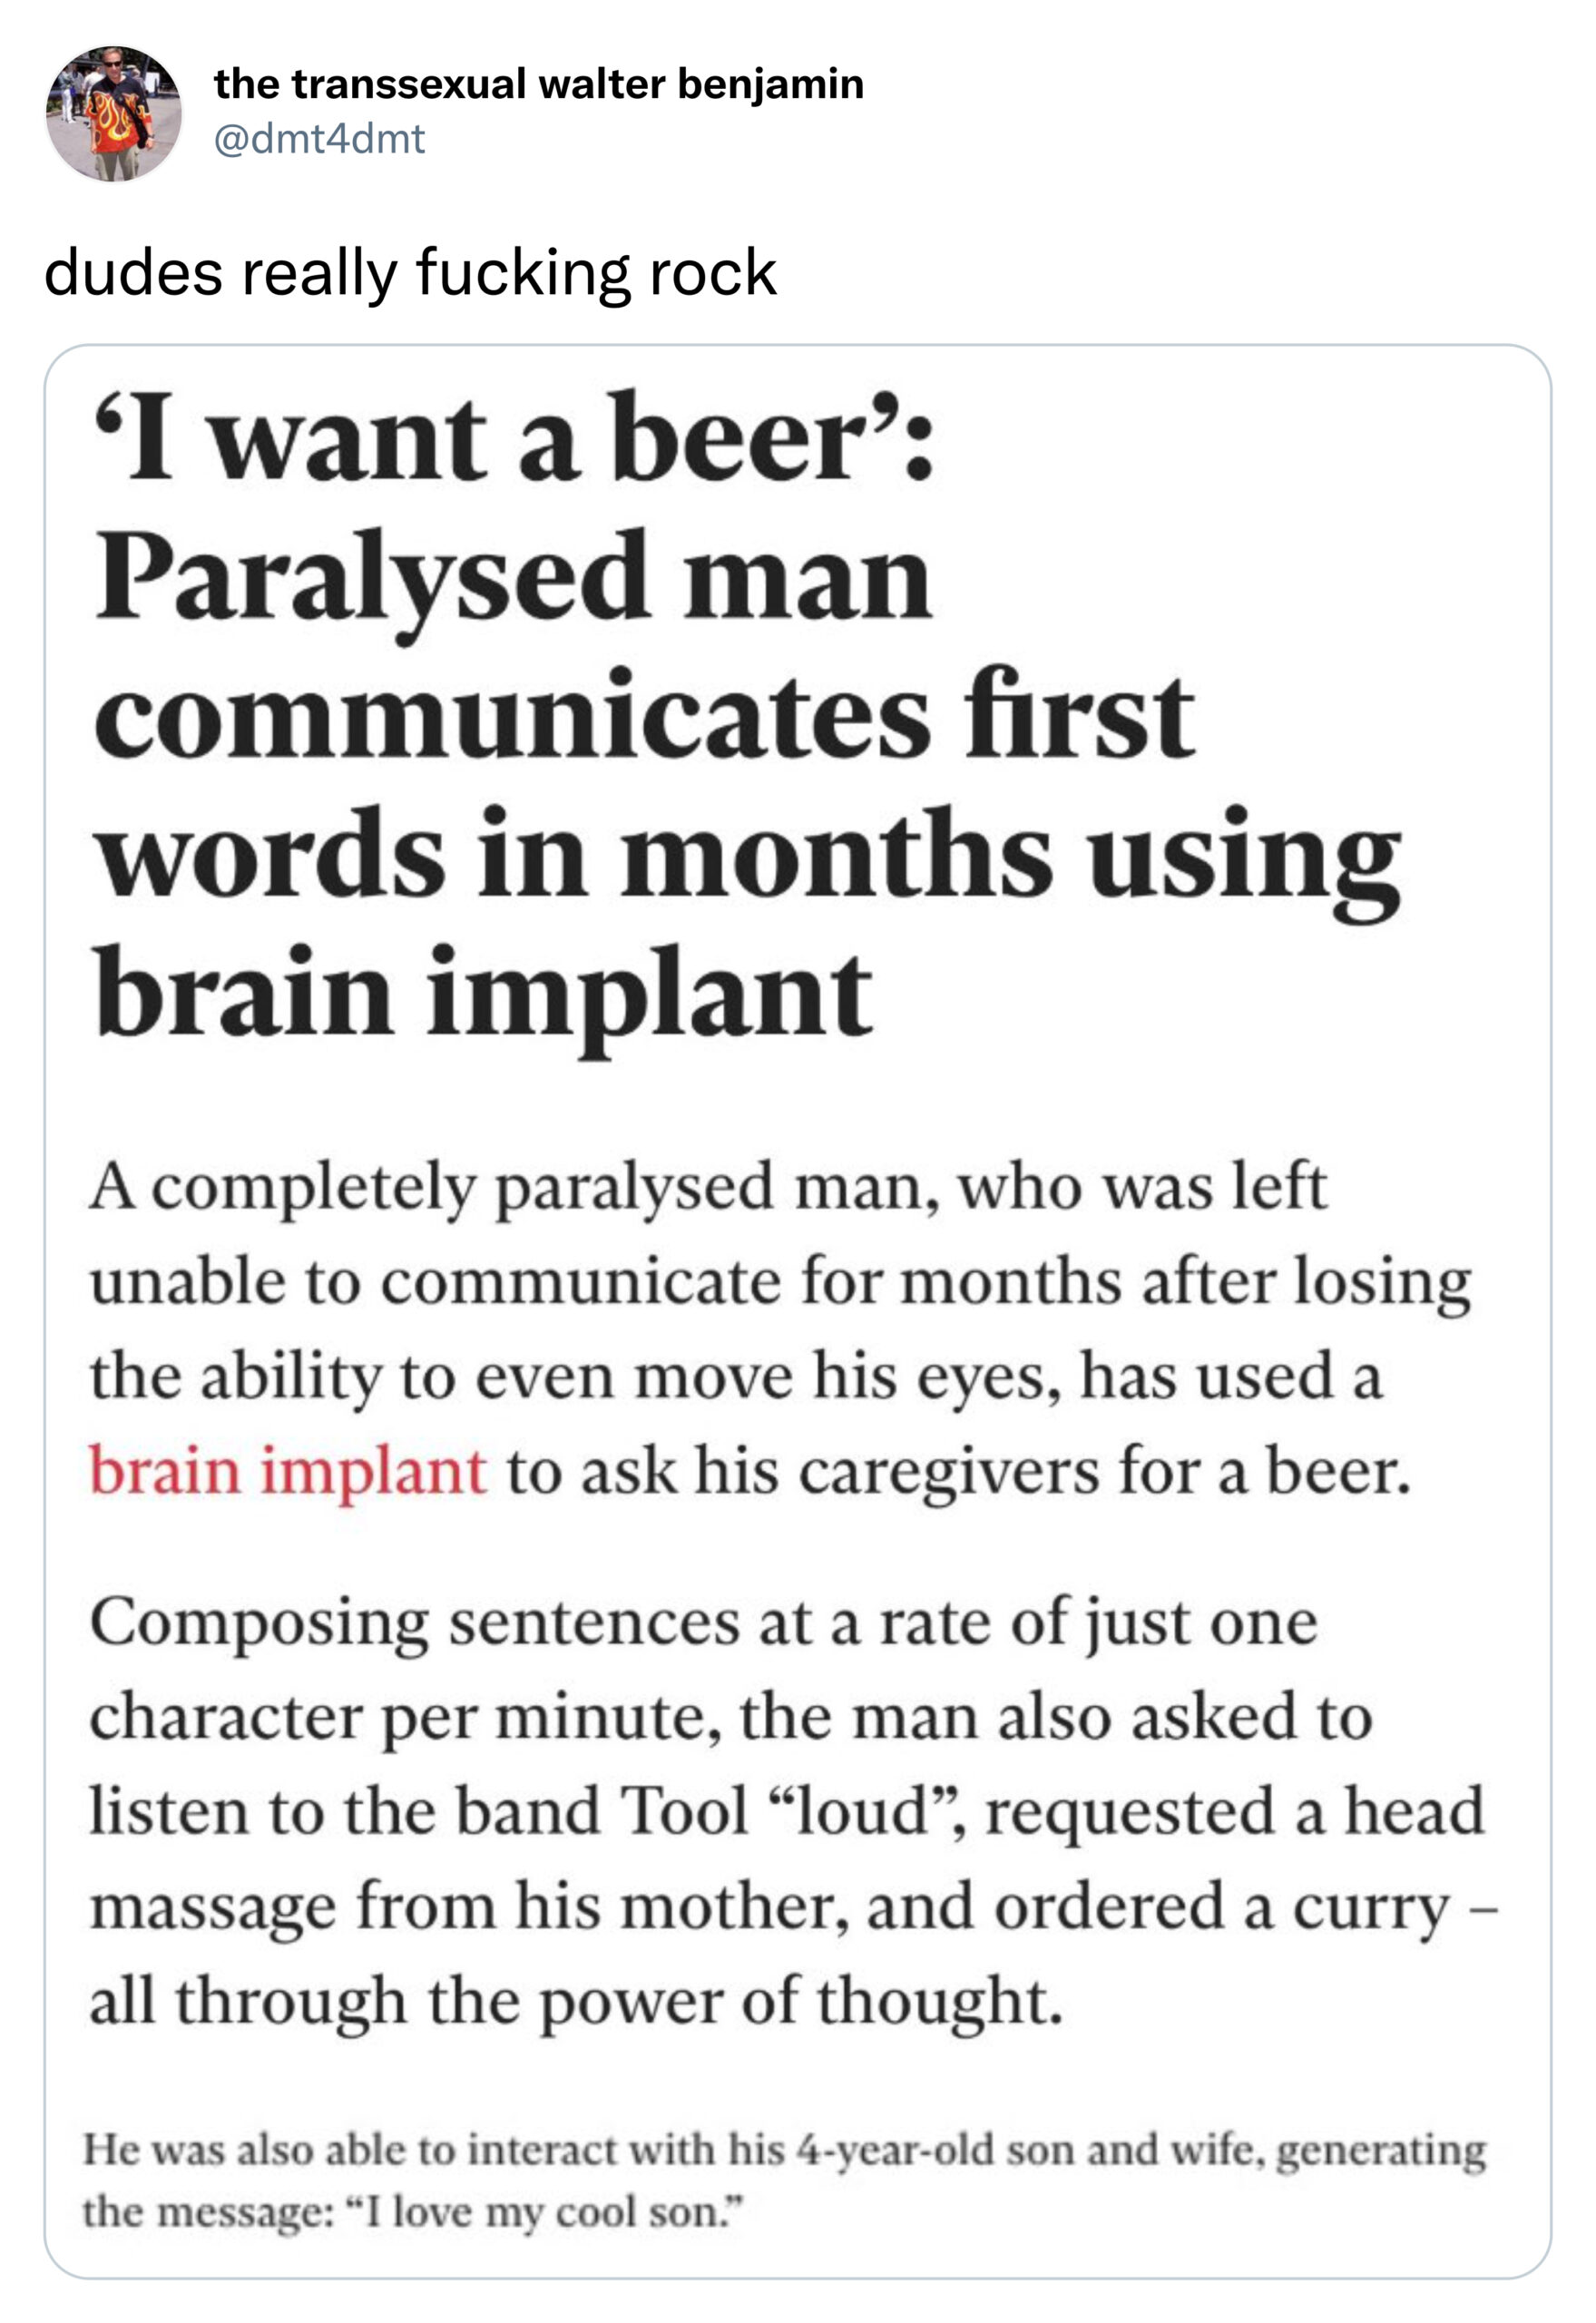 paper - the transsexual walter benjamin dudes really fucking rock 'I want a beer' Paralysed man communicates first words in months using brain implant A completely paralysed man, who was left unable to communicate for months after losing the ability to ev